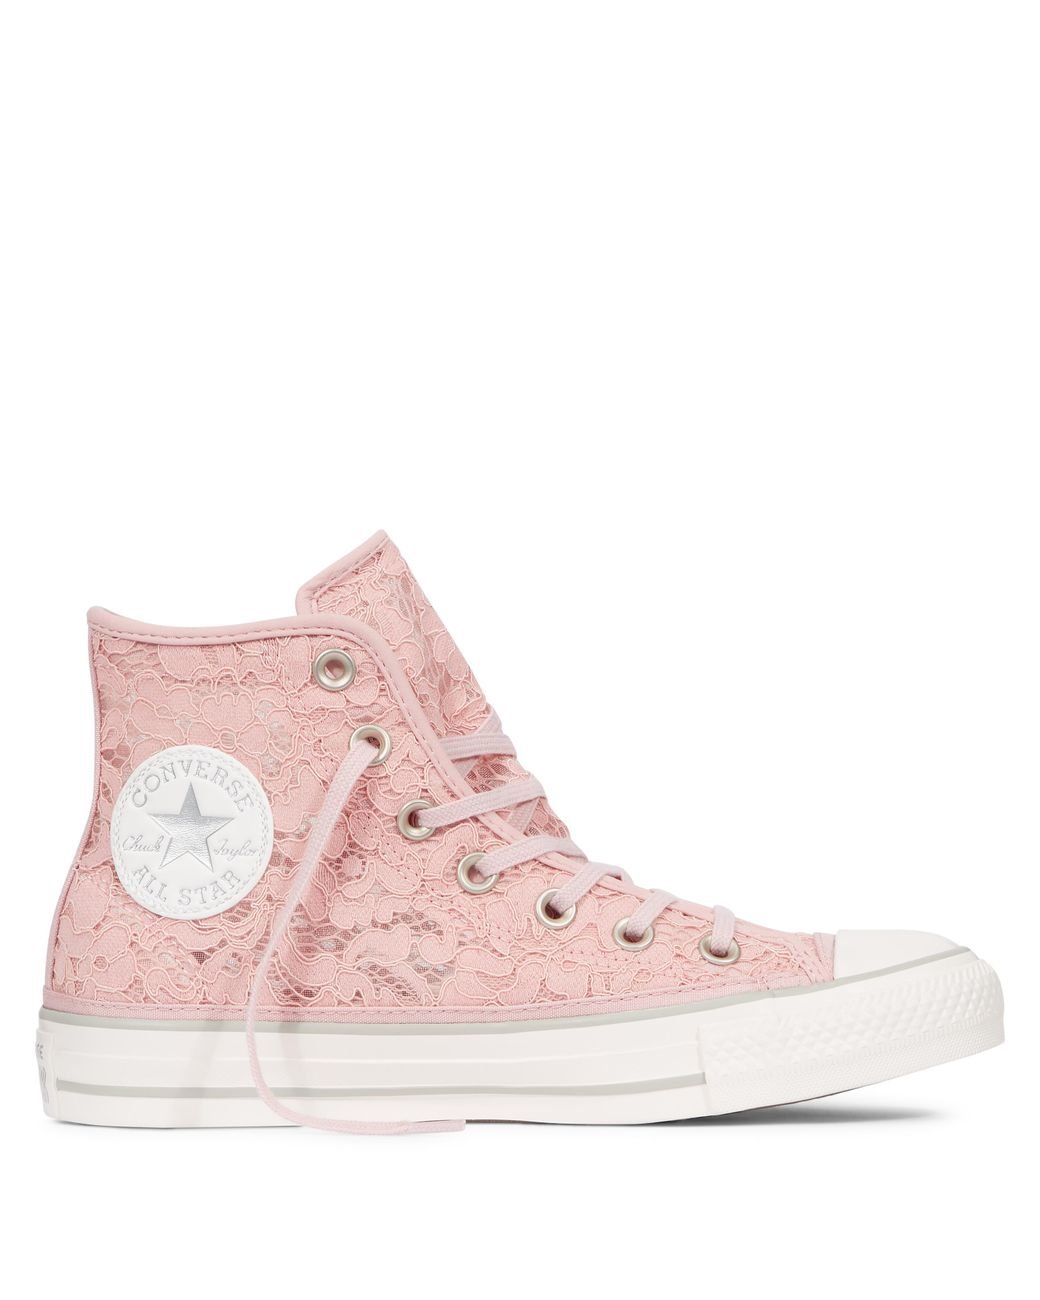 Converse Chuck Taylor All Star Flower Lace in Pink | Lyst UK